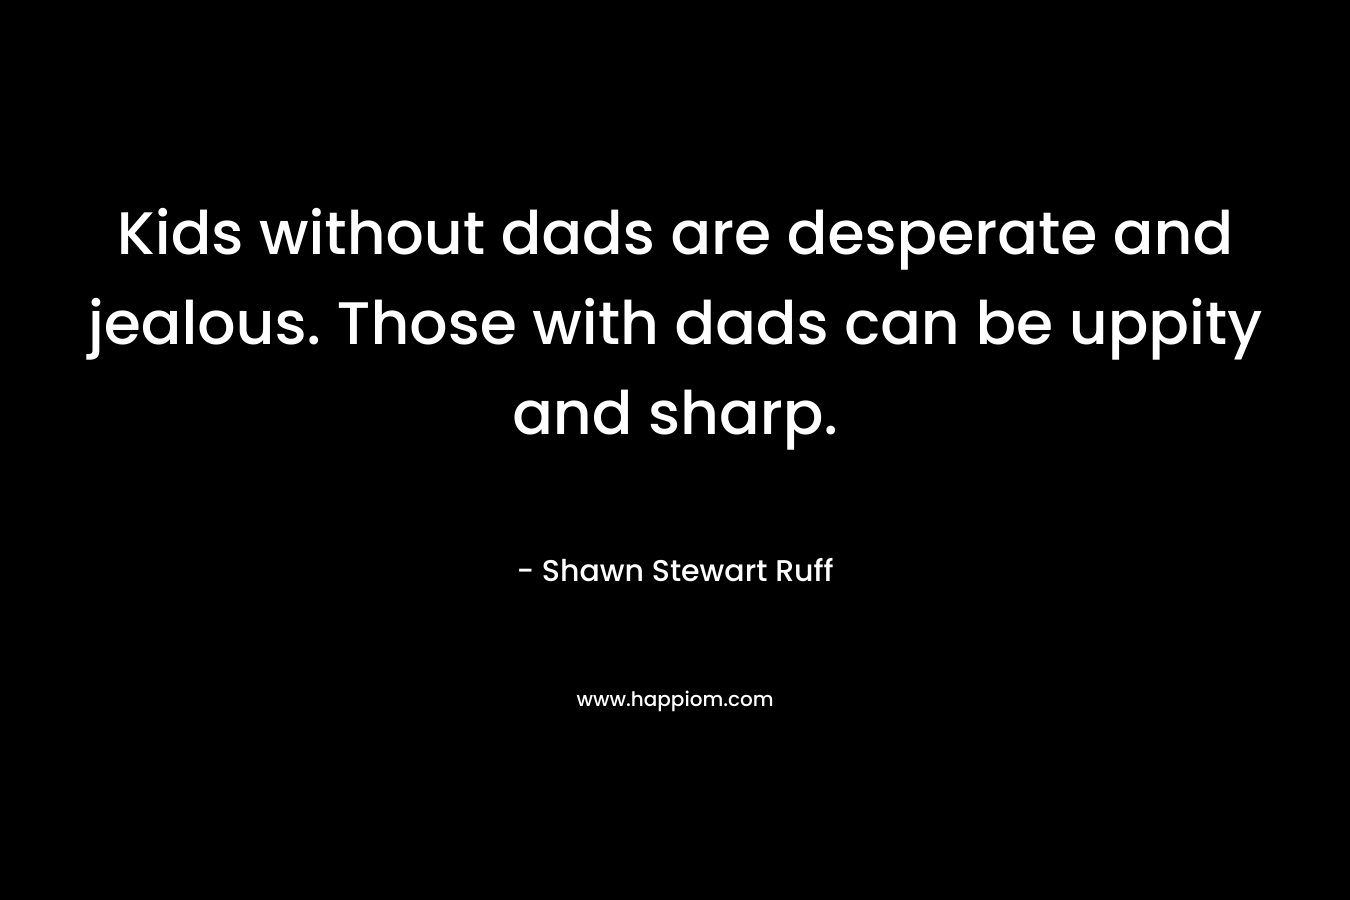 Kids without dads are desperate and jealous. Those with dads can be uppity and sharp.